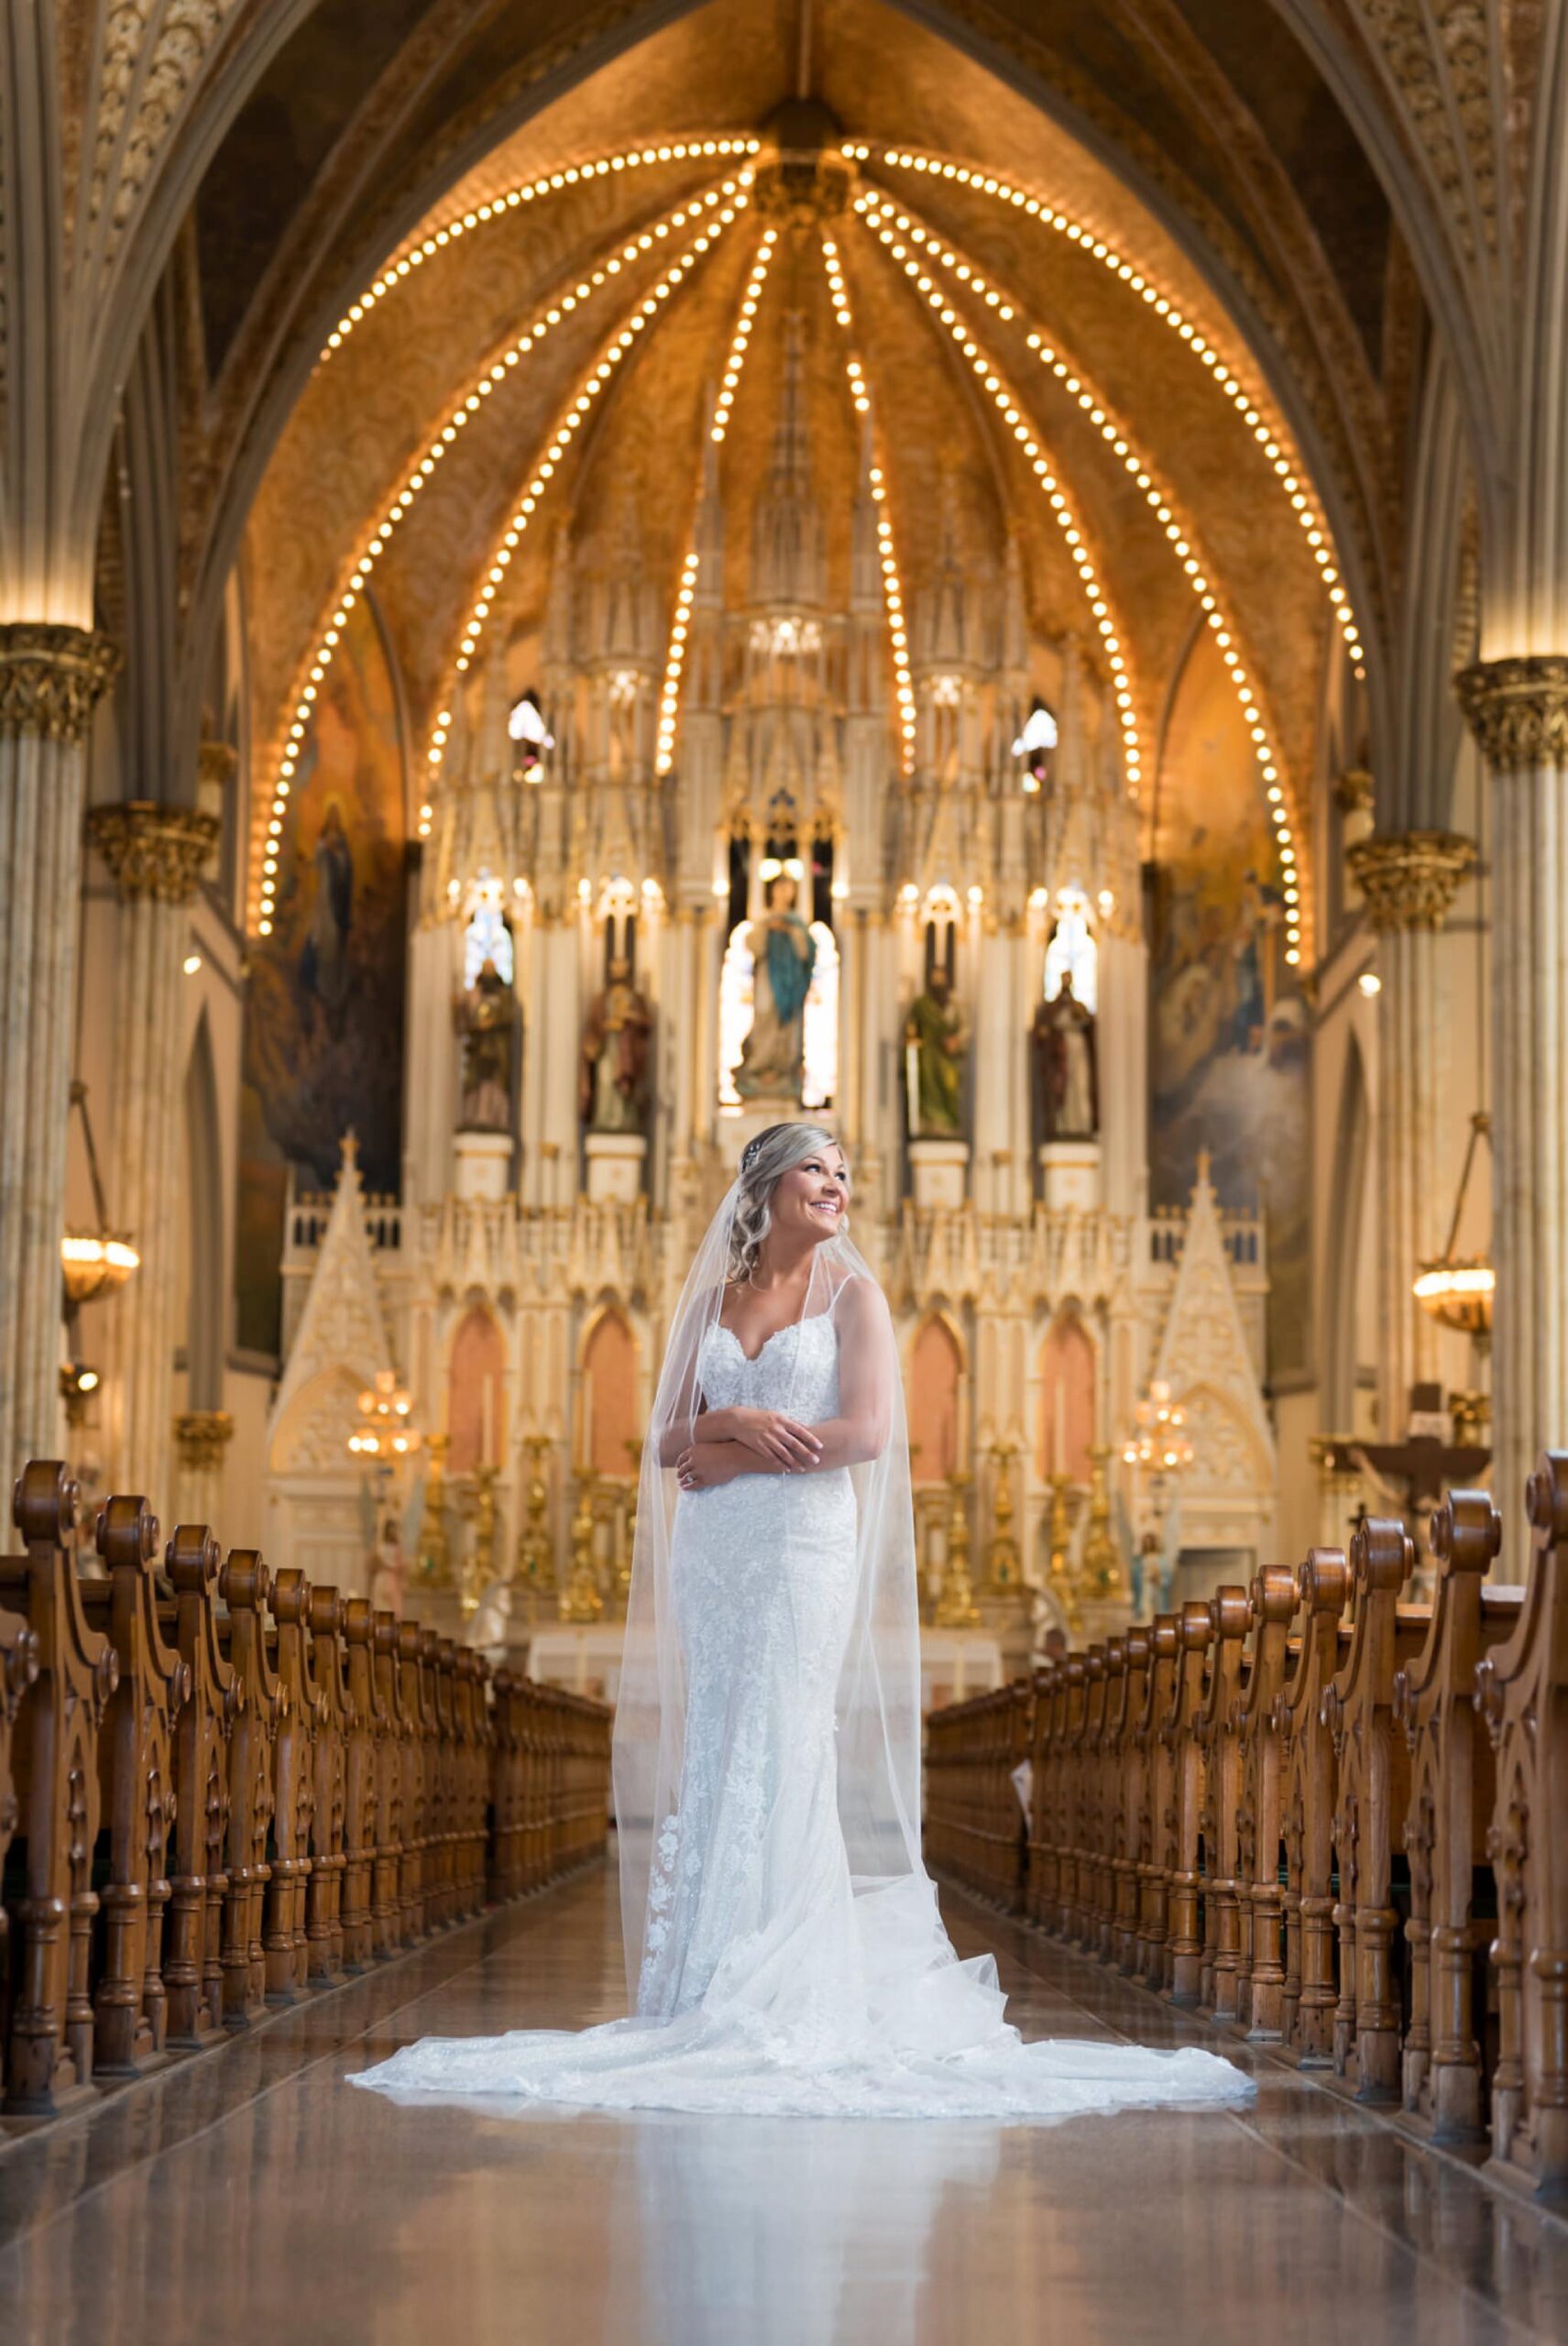 A bride poses while holding her veil in the center aisle of Detroit's Sweetest Heart of Mary Catholic Church.  